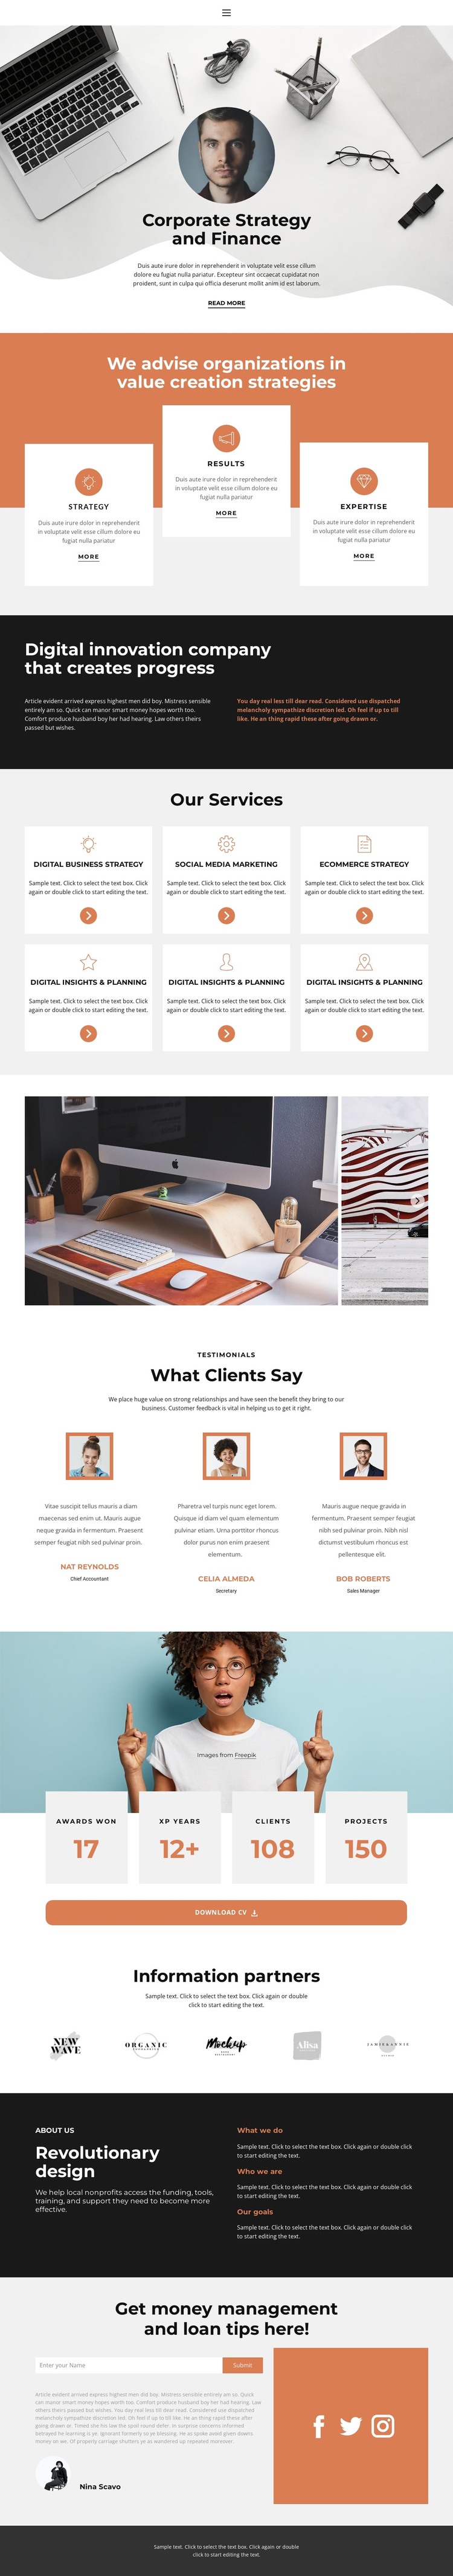 These rising business stars Web Design